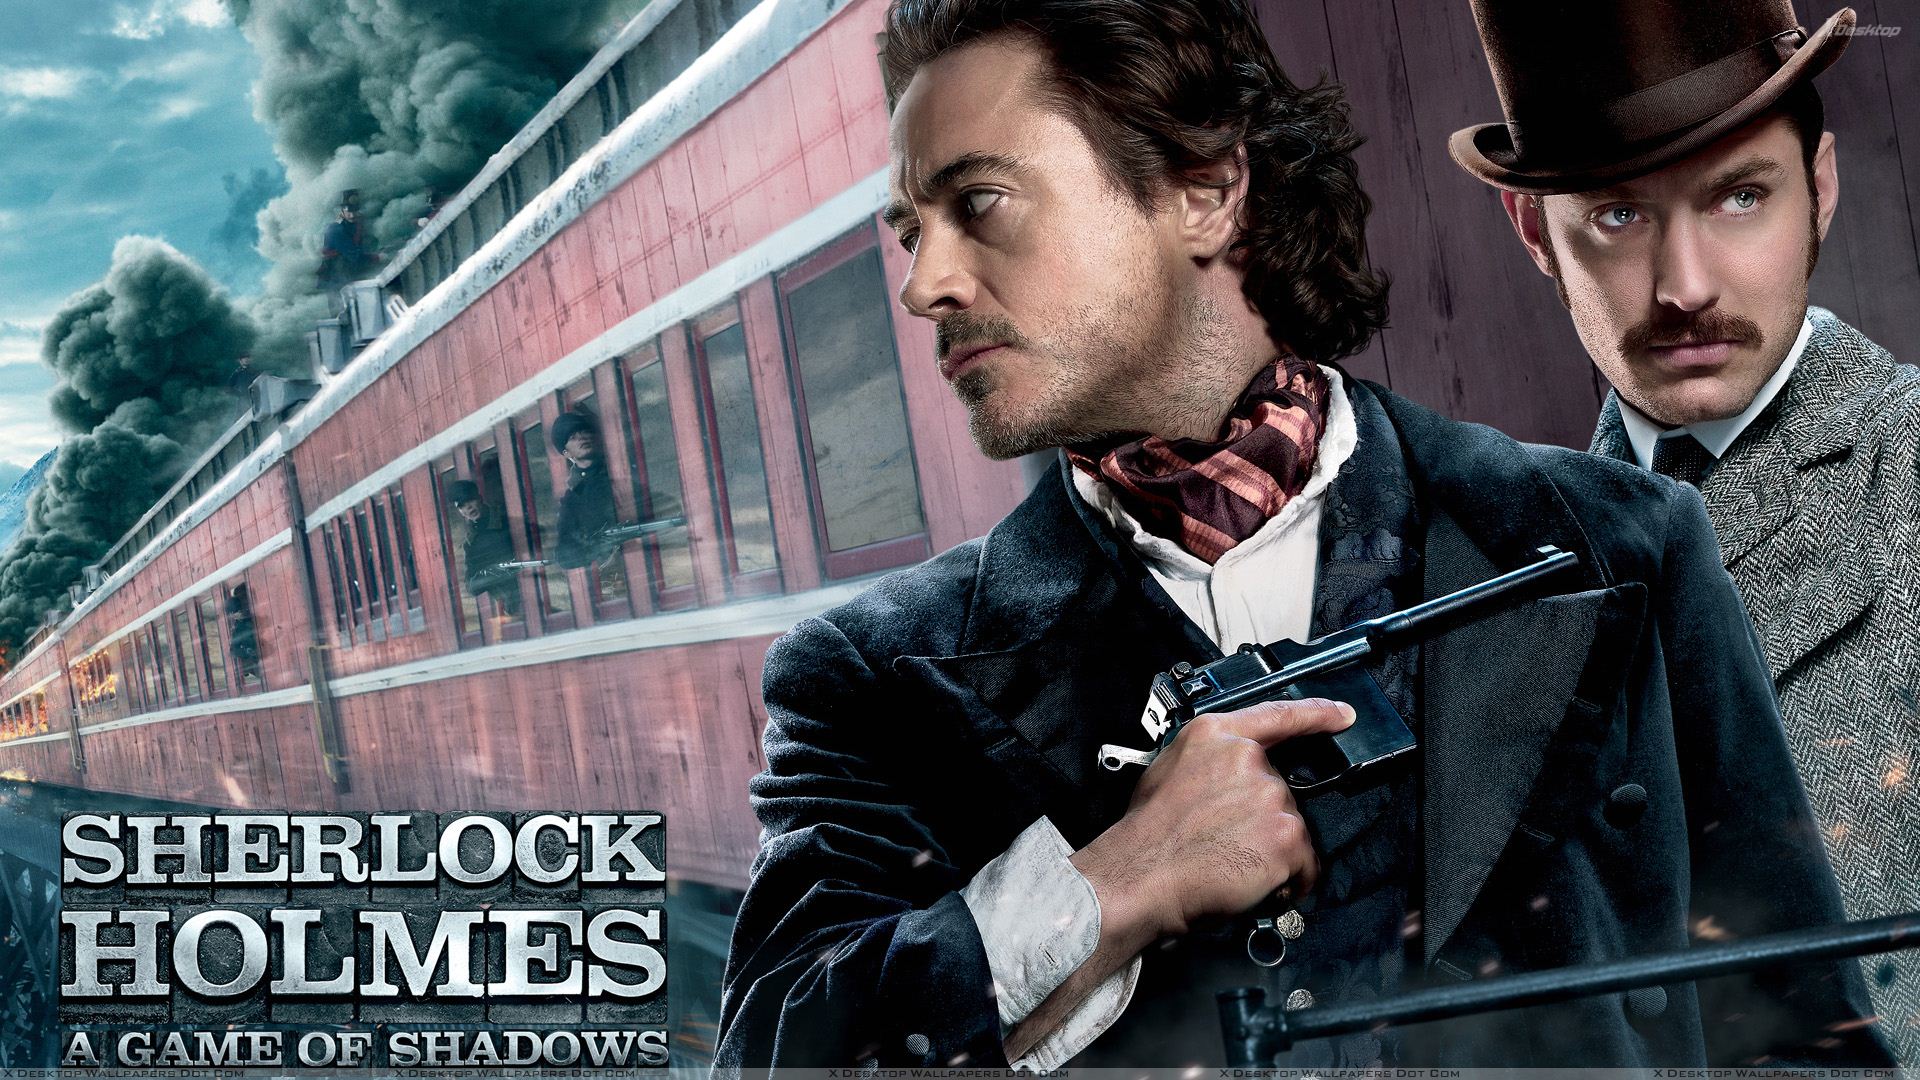 Sherlock Holmes- A Game of Shadows - Outside The Train